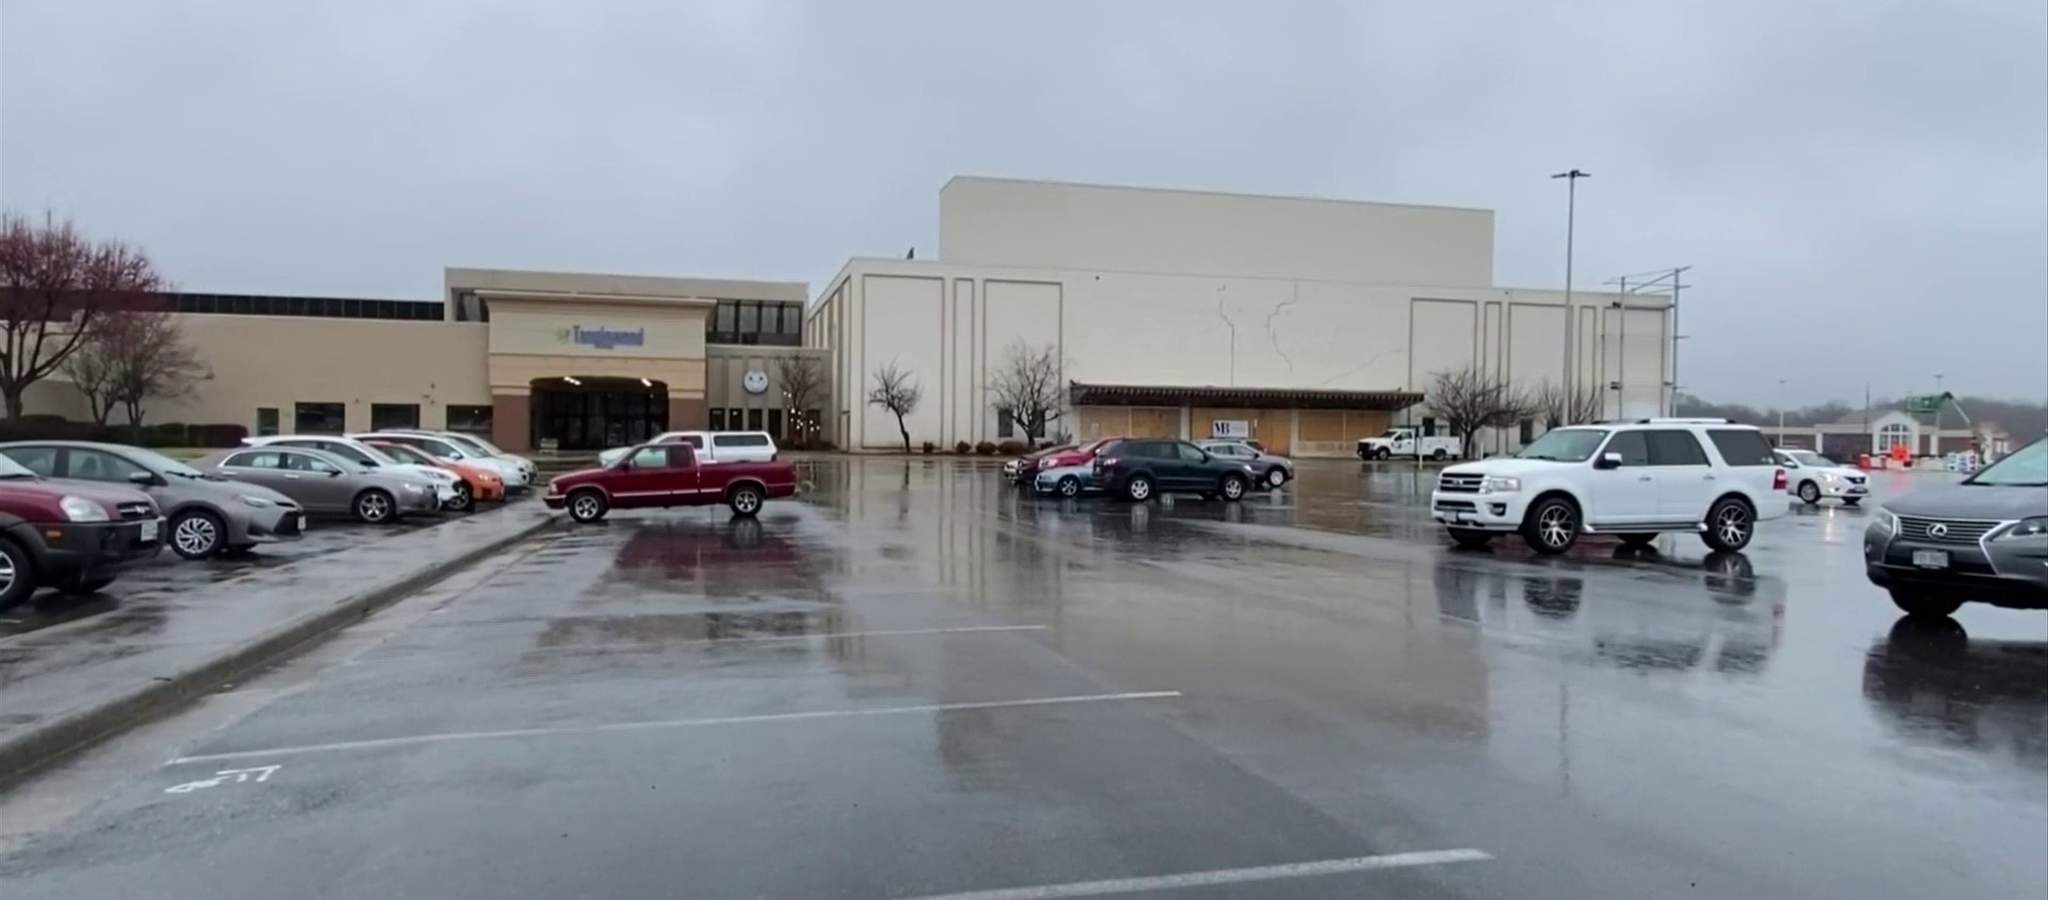 Upgrades to Tanglewood Mall, projects around it to take 15-20 years